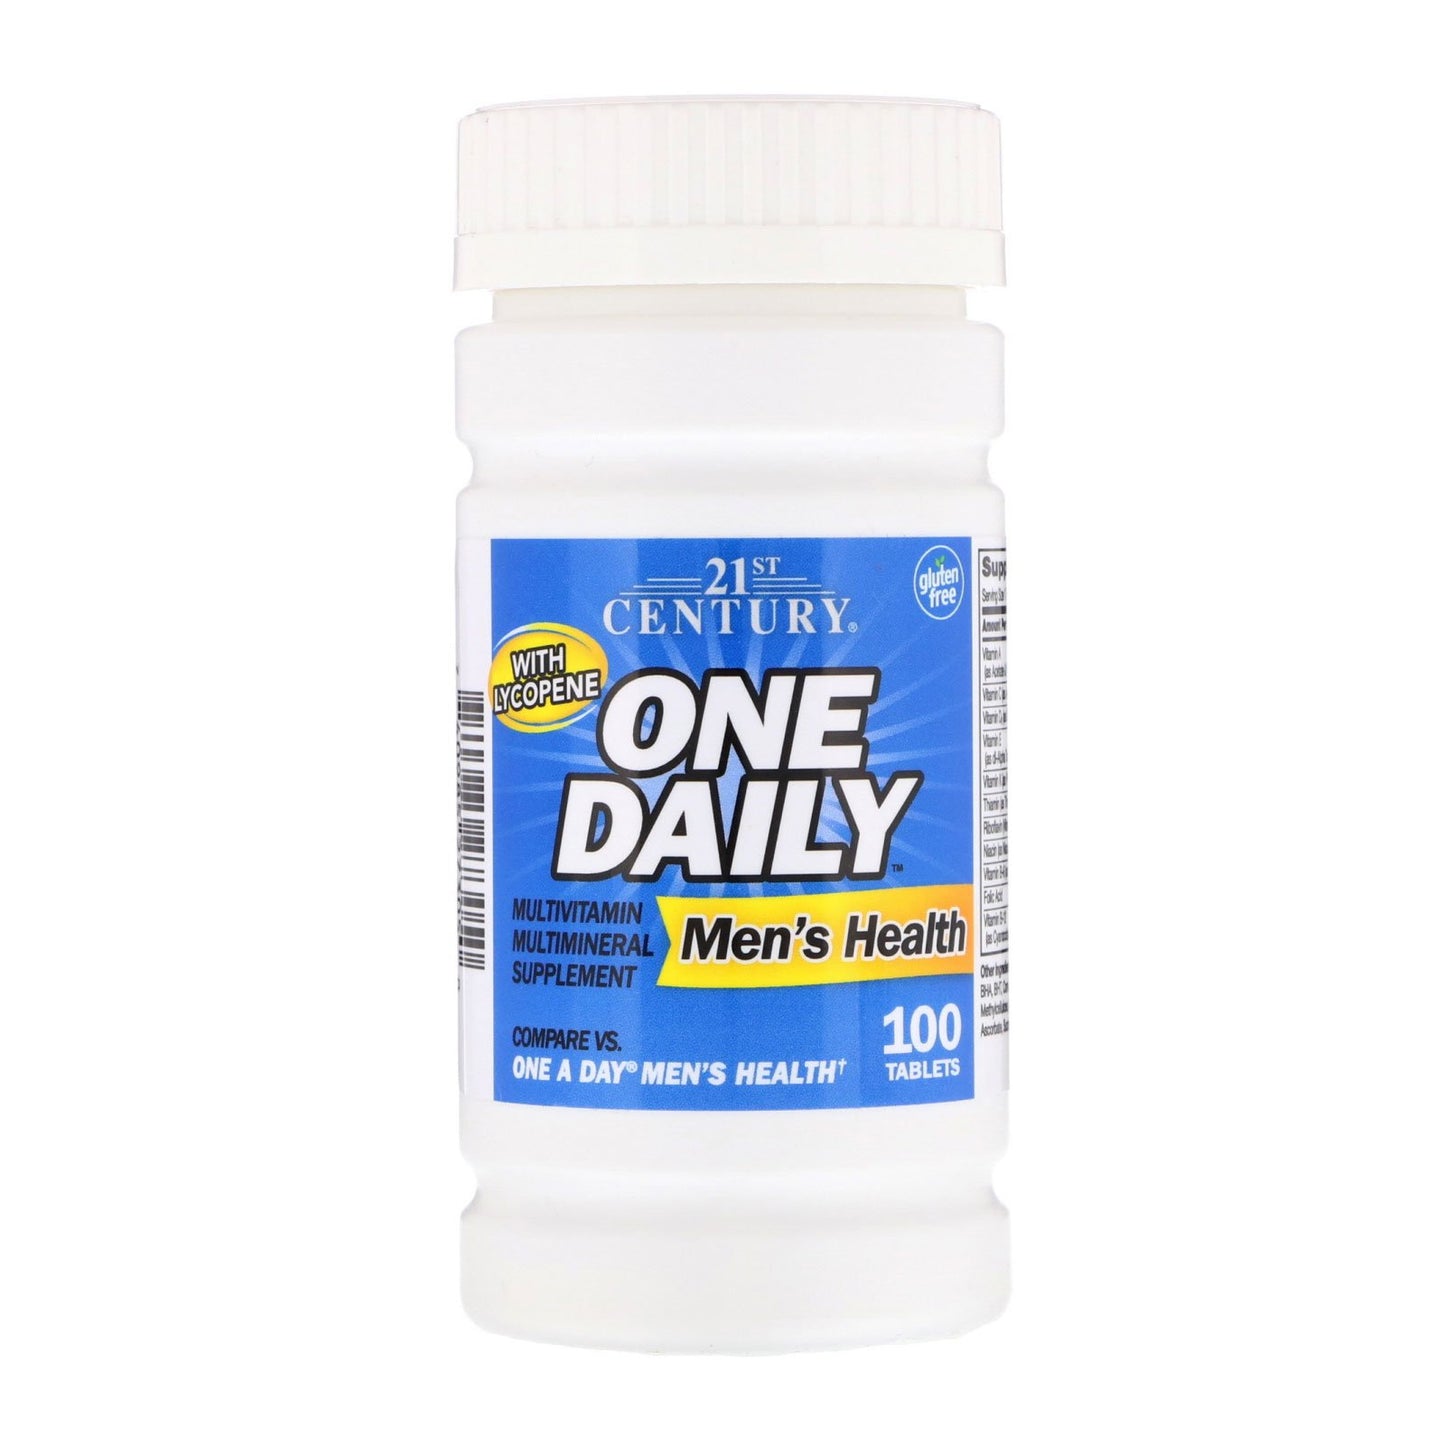 21ST CENTURY ONE DAILY MEN’S HEALTH, 100 TABLETS